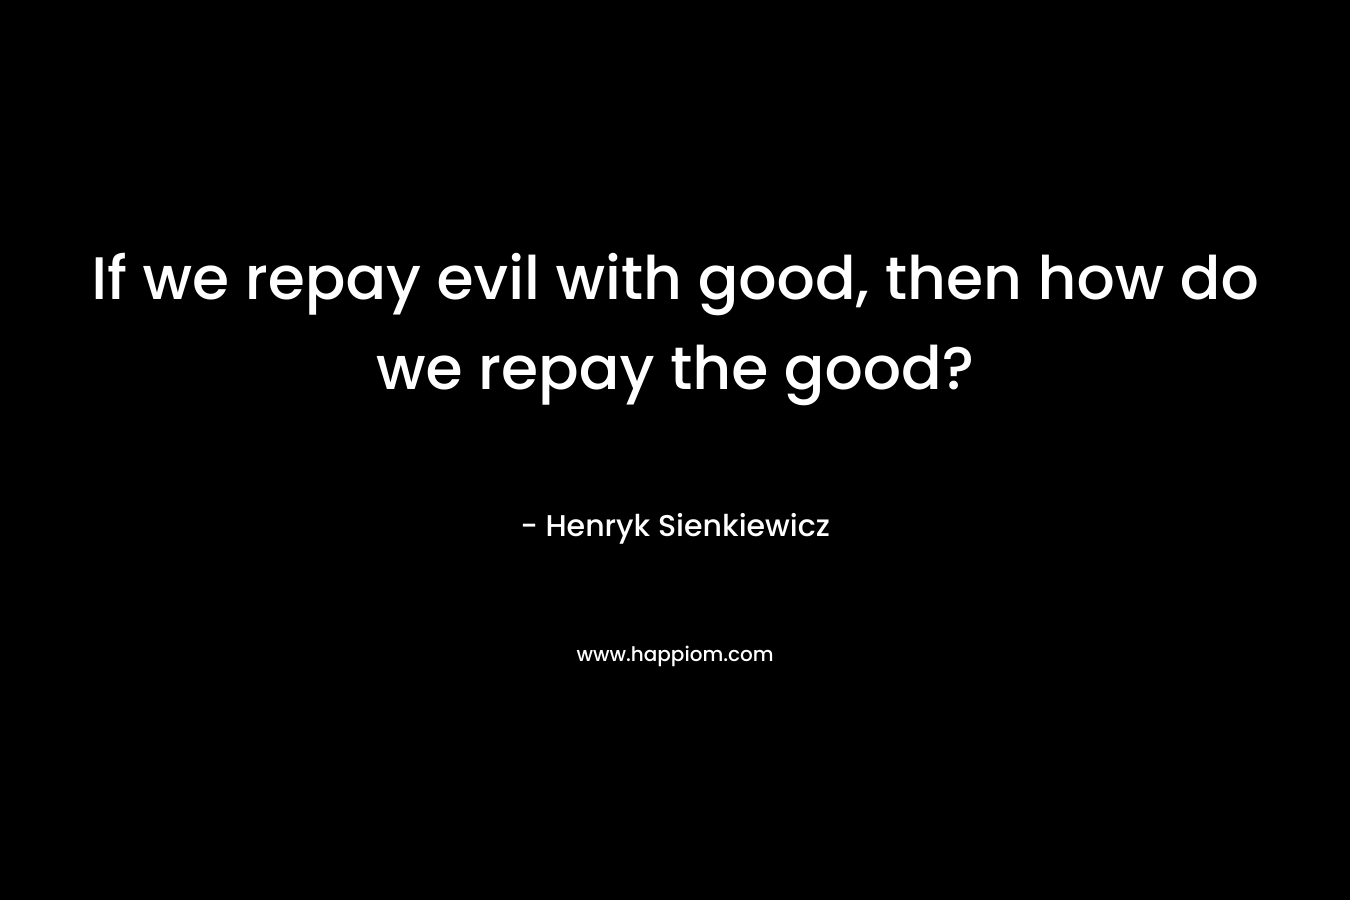 If we repay evil with good, then how do we repay the good? – Henryk Sienkiewicz